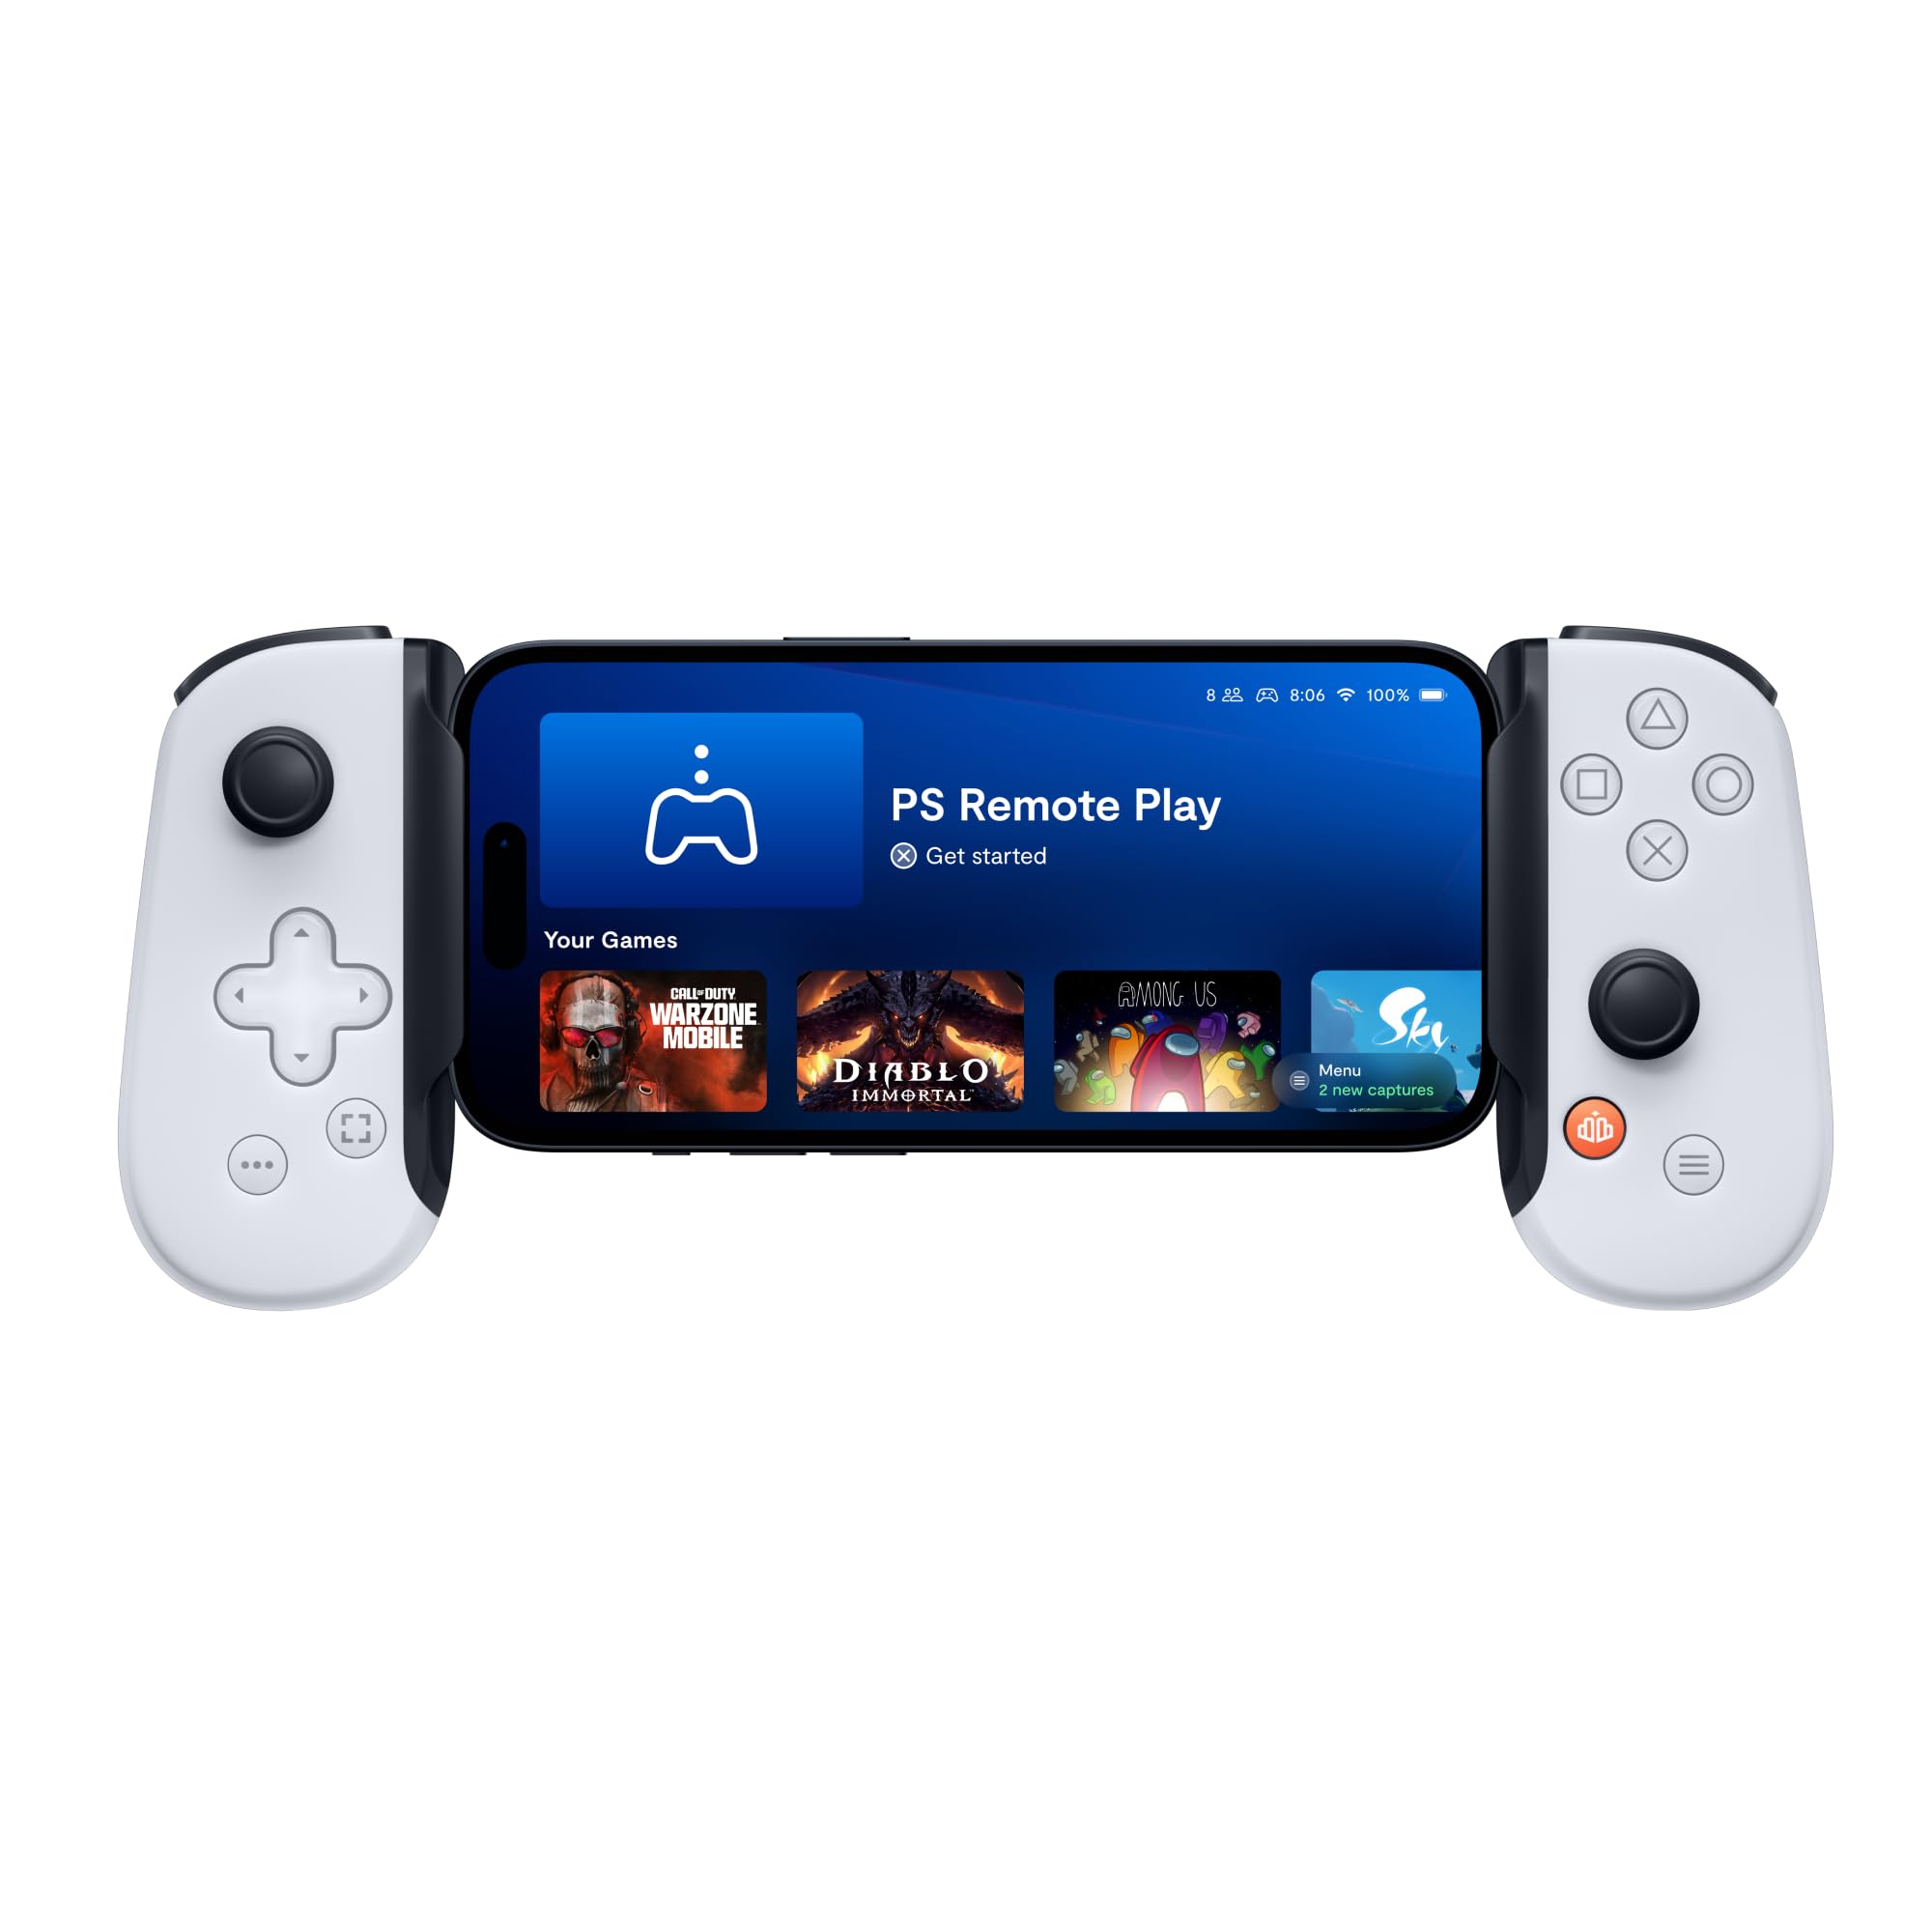 If possible, borrow or use another PS4 controller to test if the issue is specific to the controller or the console.
Connect the different controller using a known working USB cable.